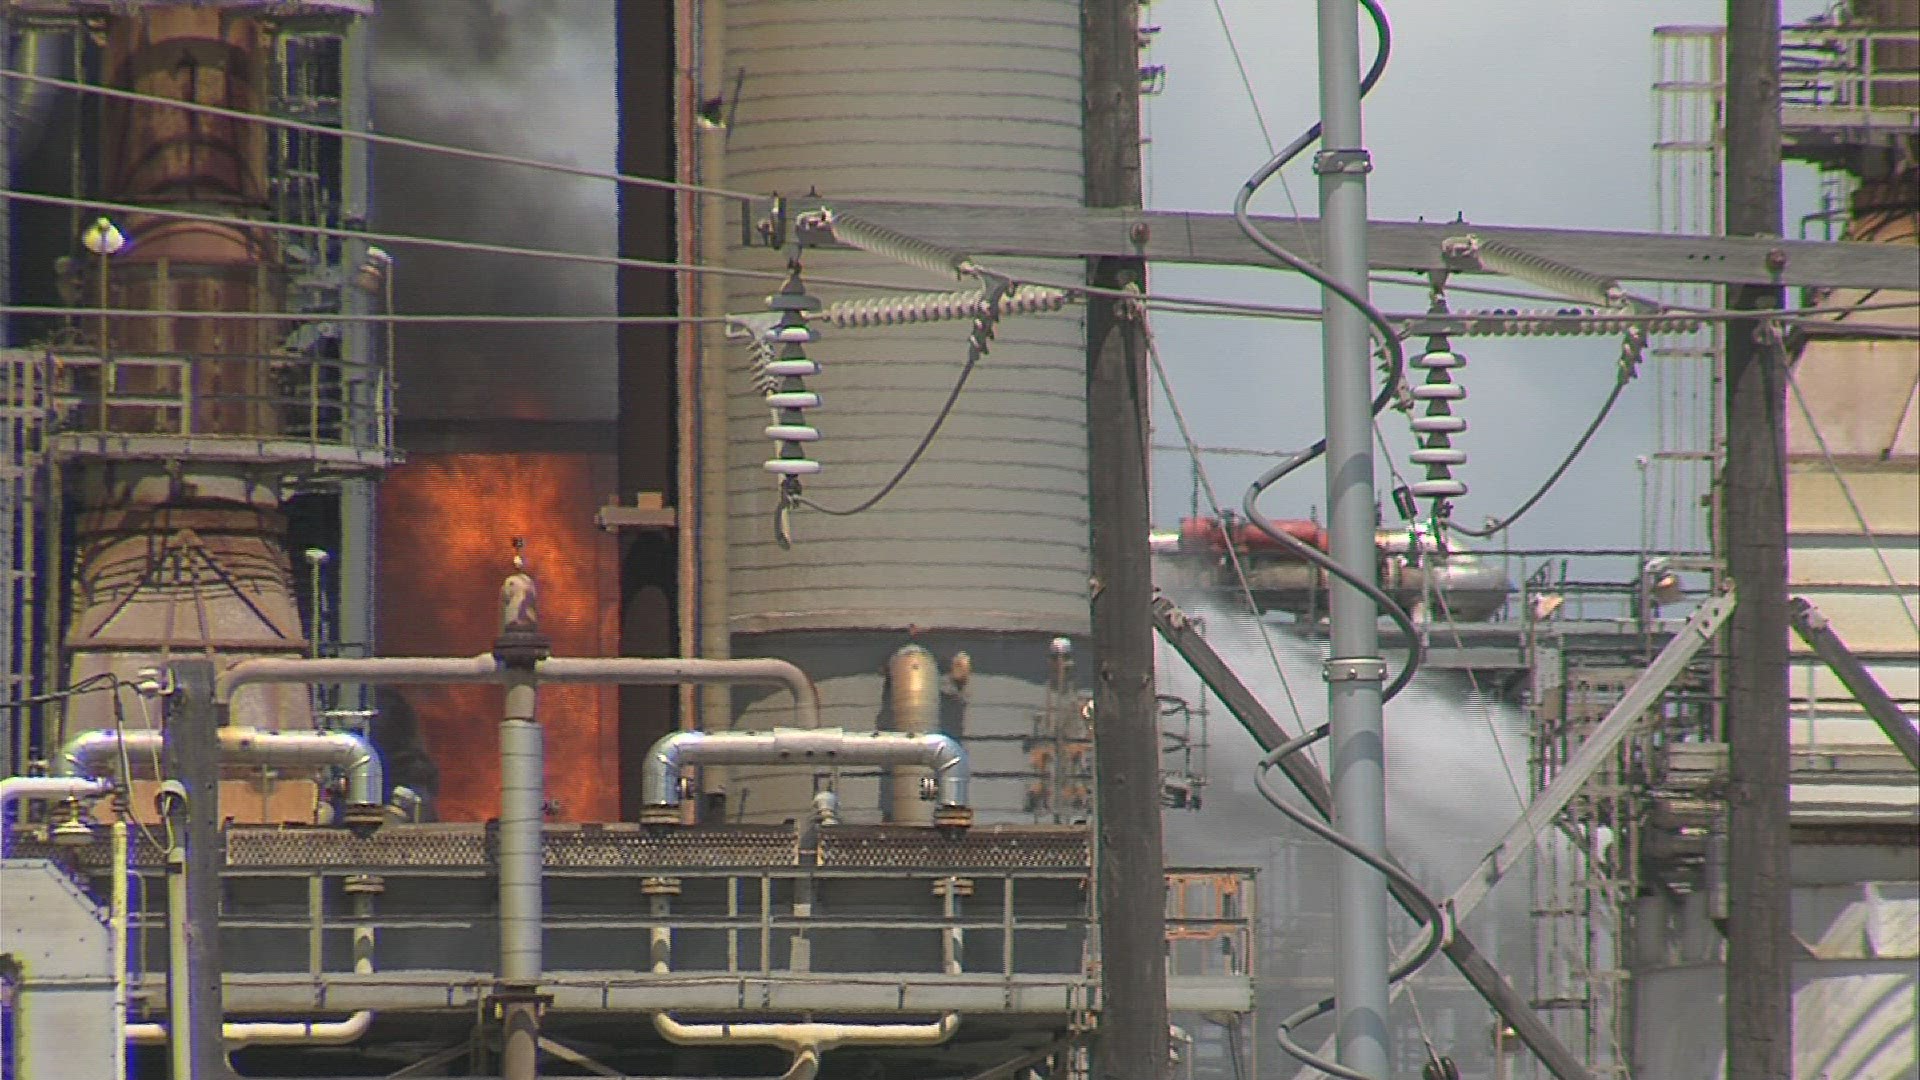 The fire at Valero's west refinery did not produce any "offsite concerns," plant officials said in a news release Wednesday afternoon.